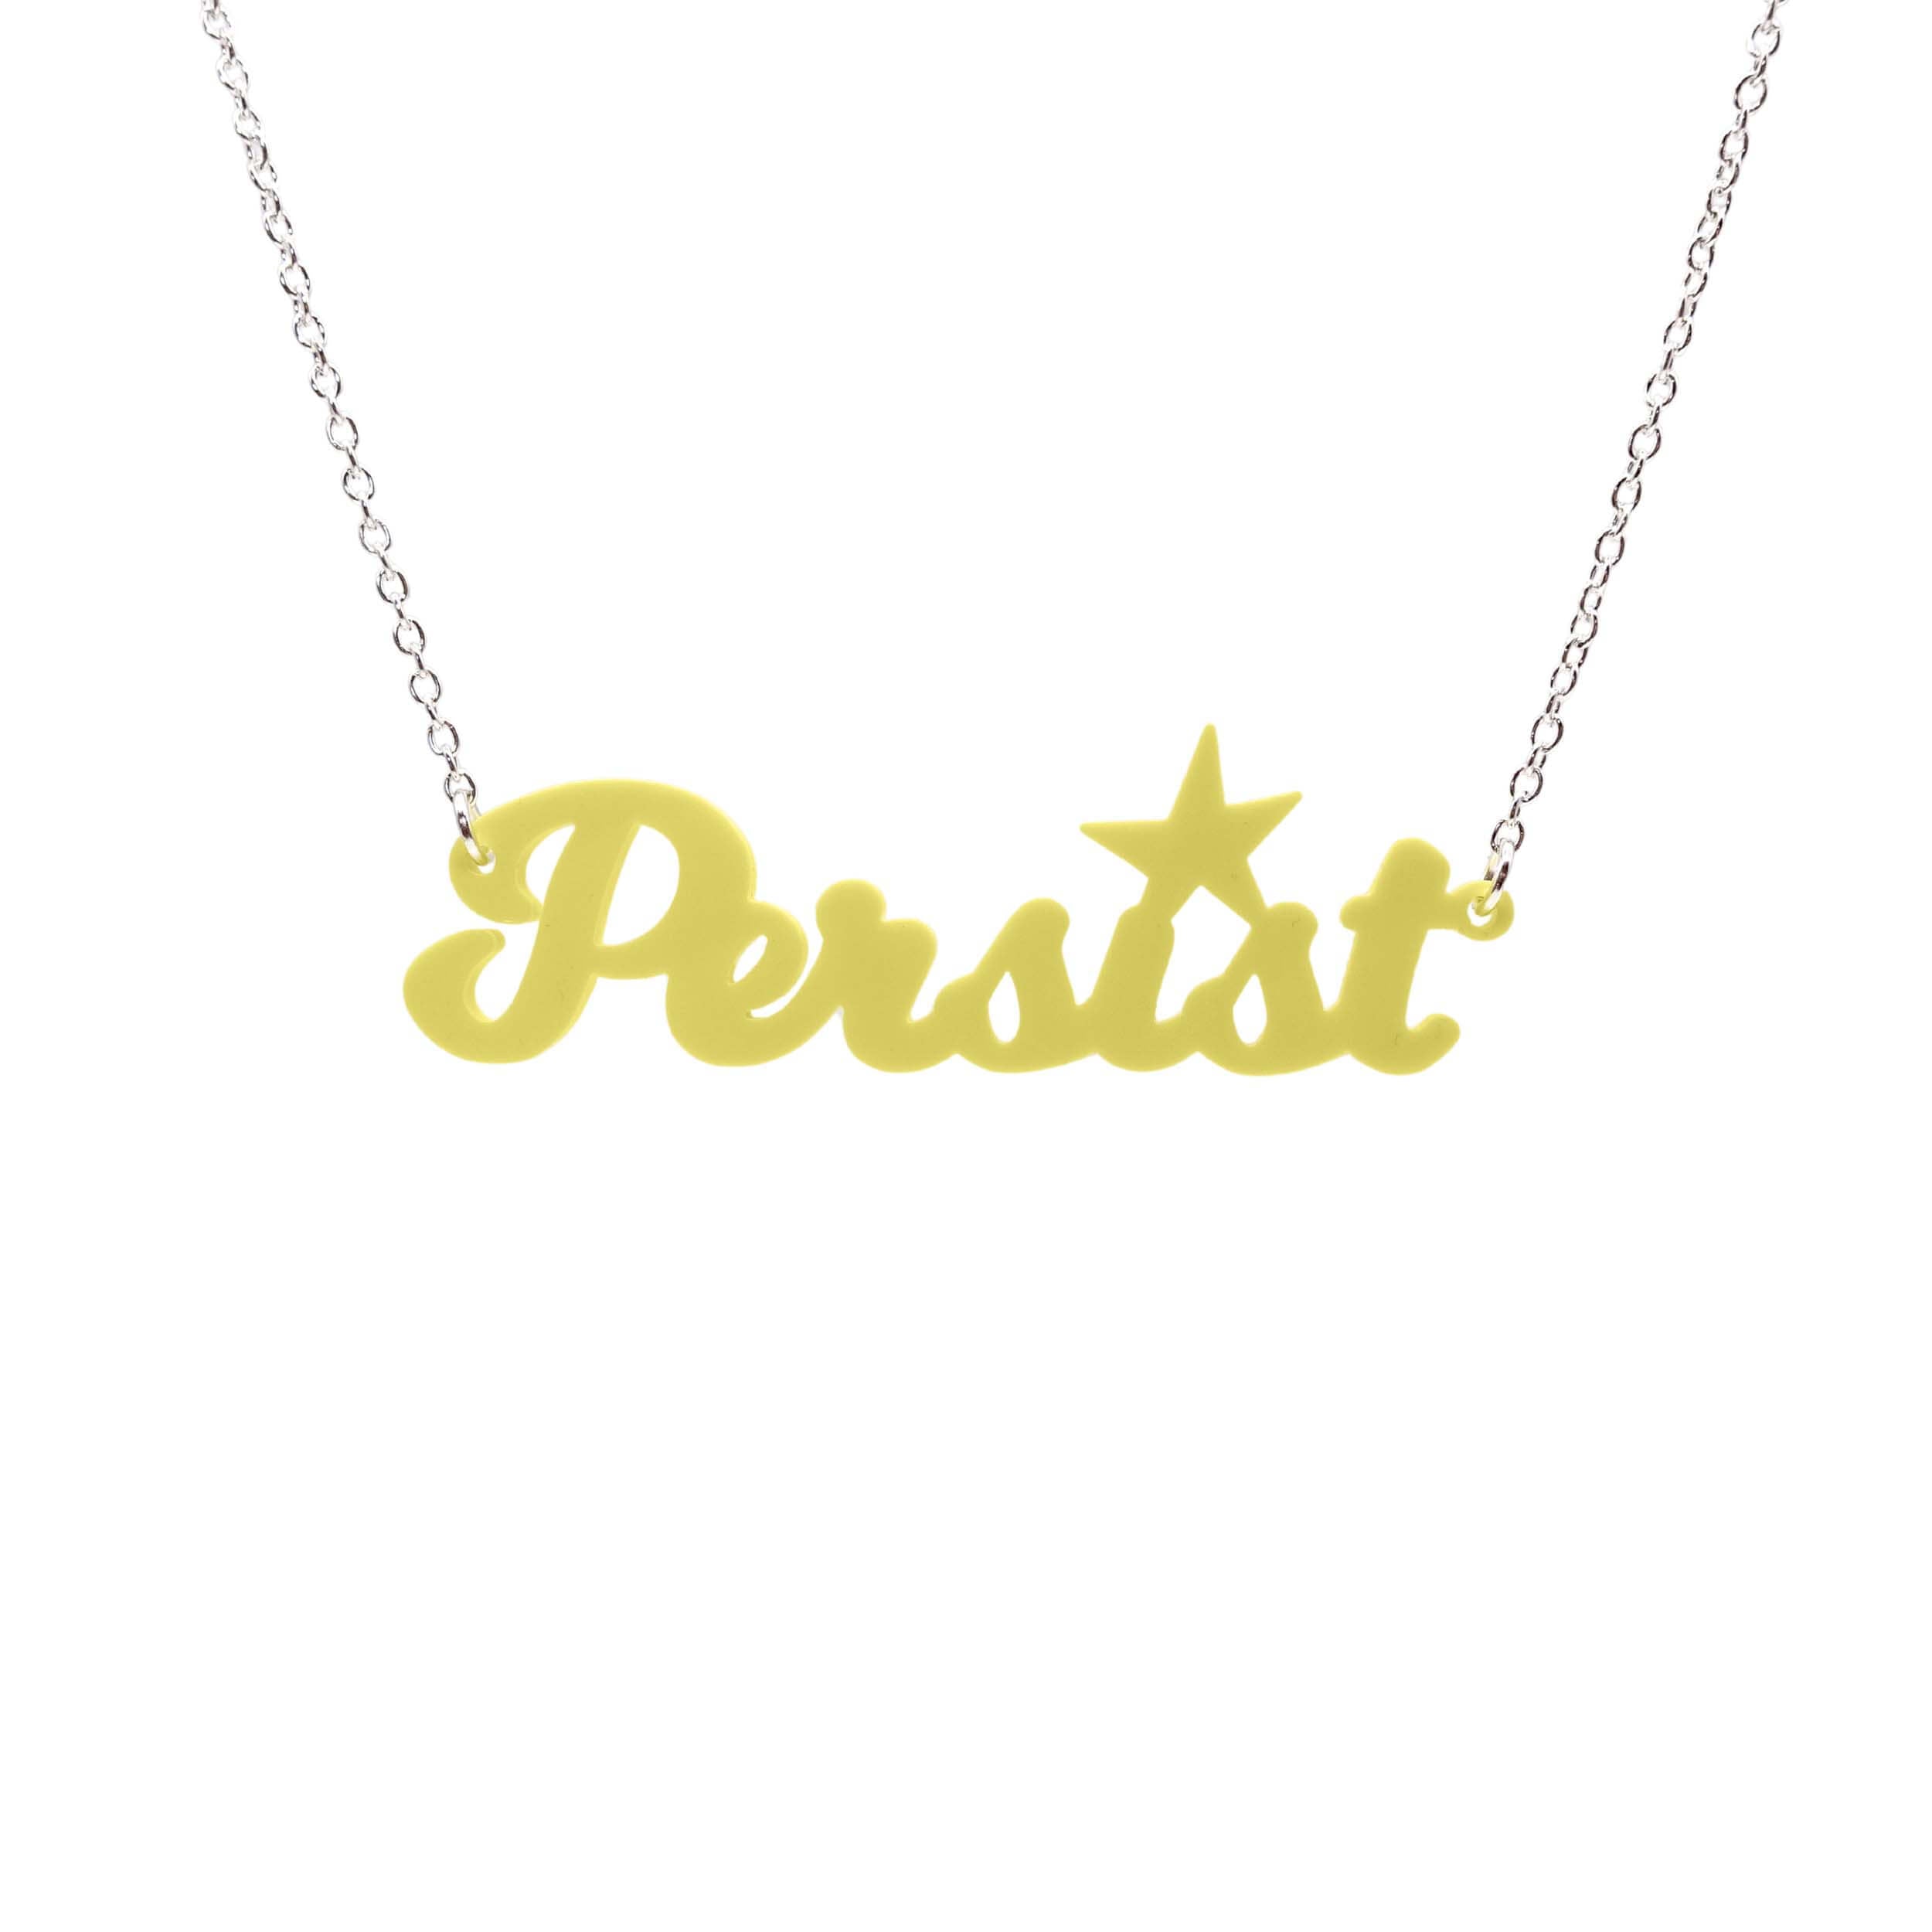 Persist necklace in script font in lemon drop, shown hanging on a white background. Join the Persisterhood! 